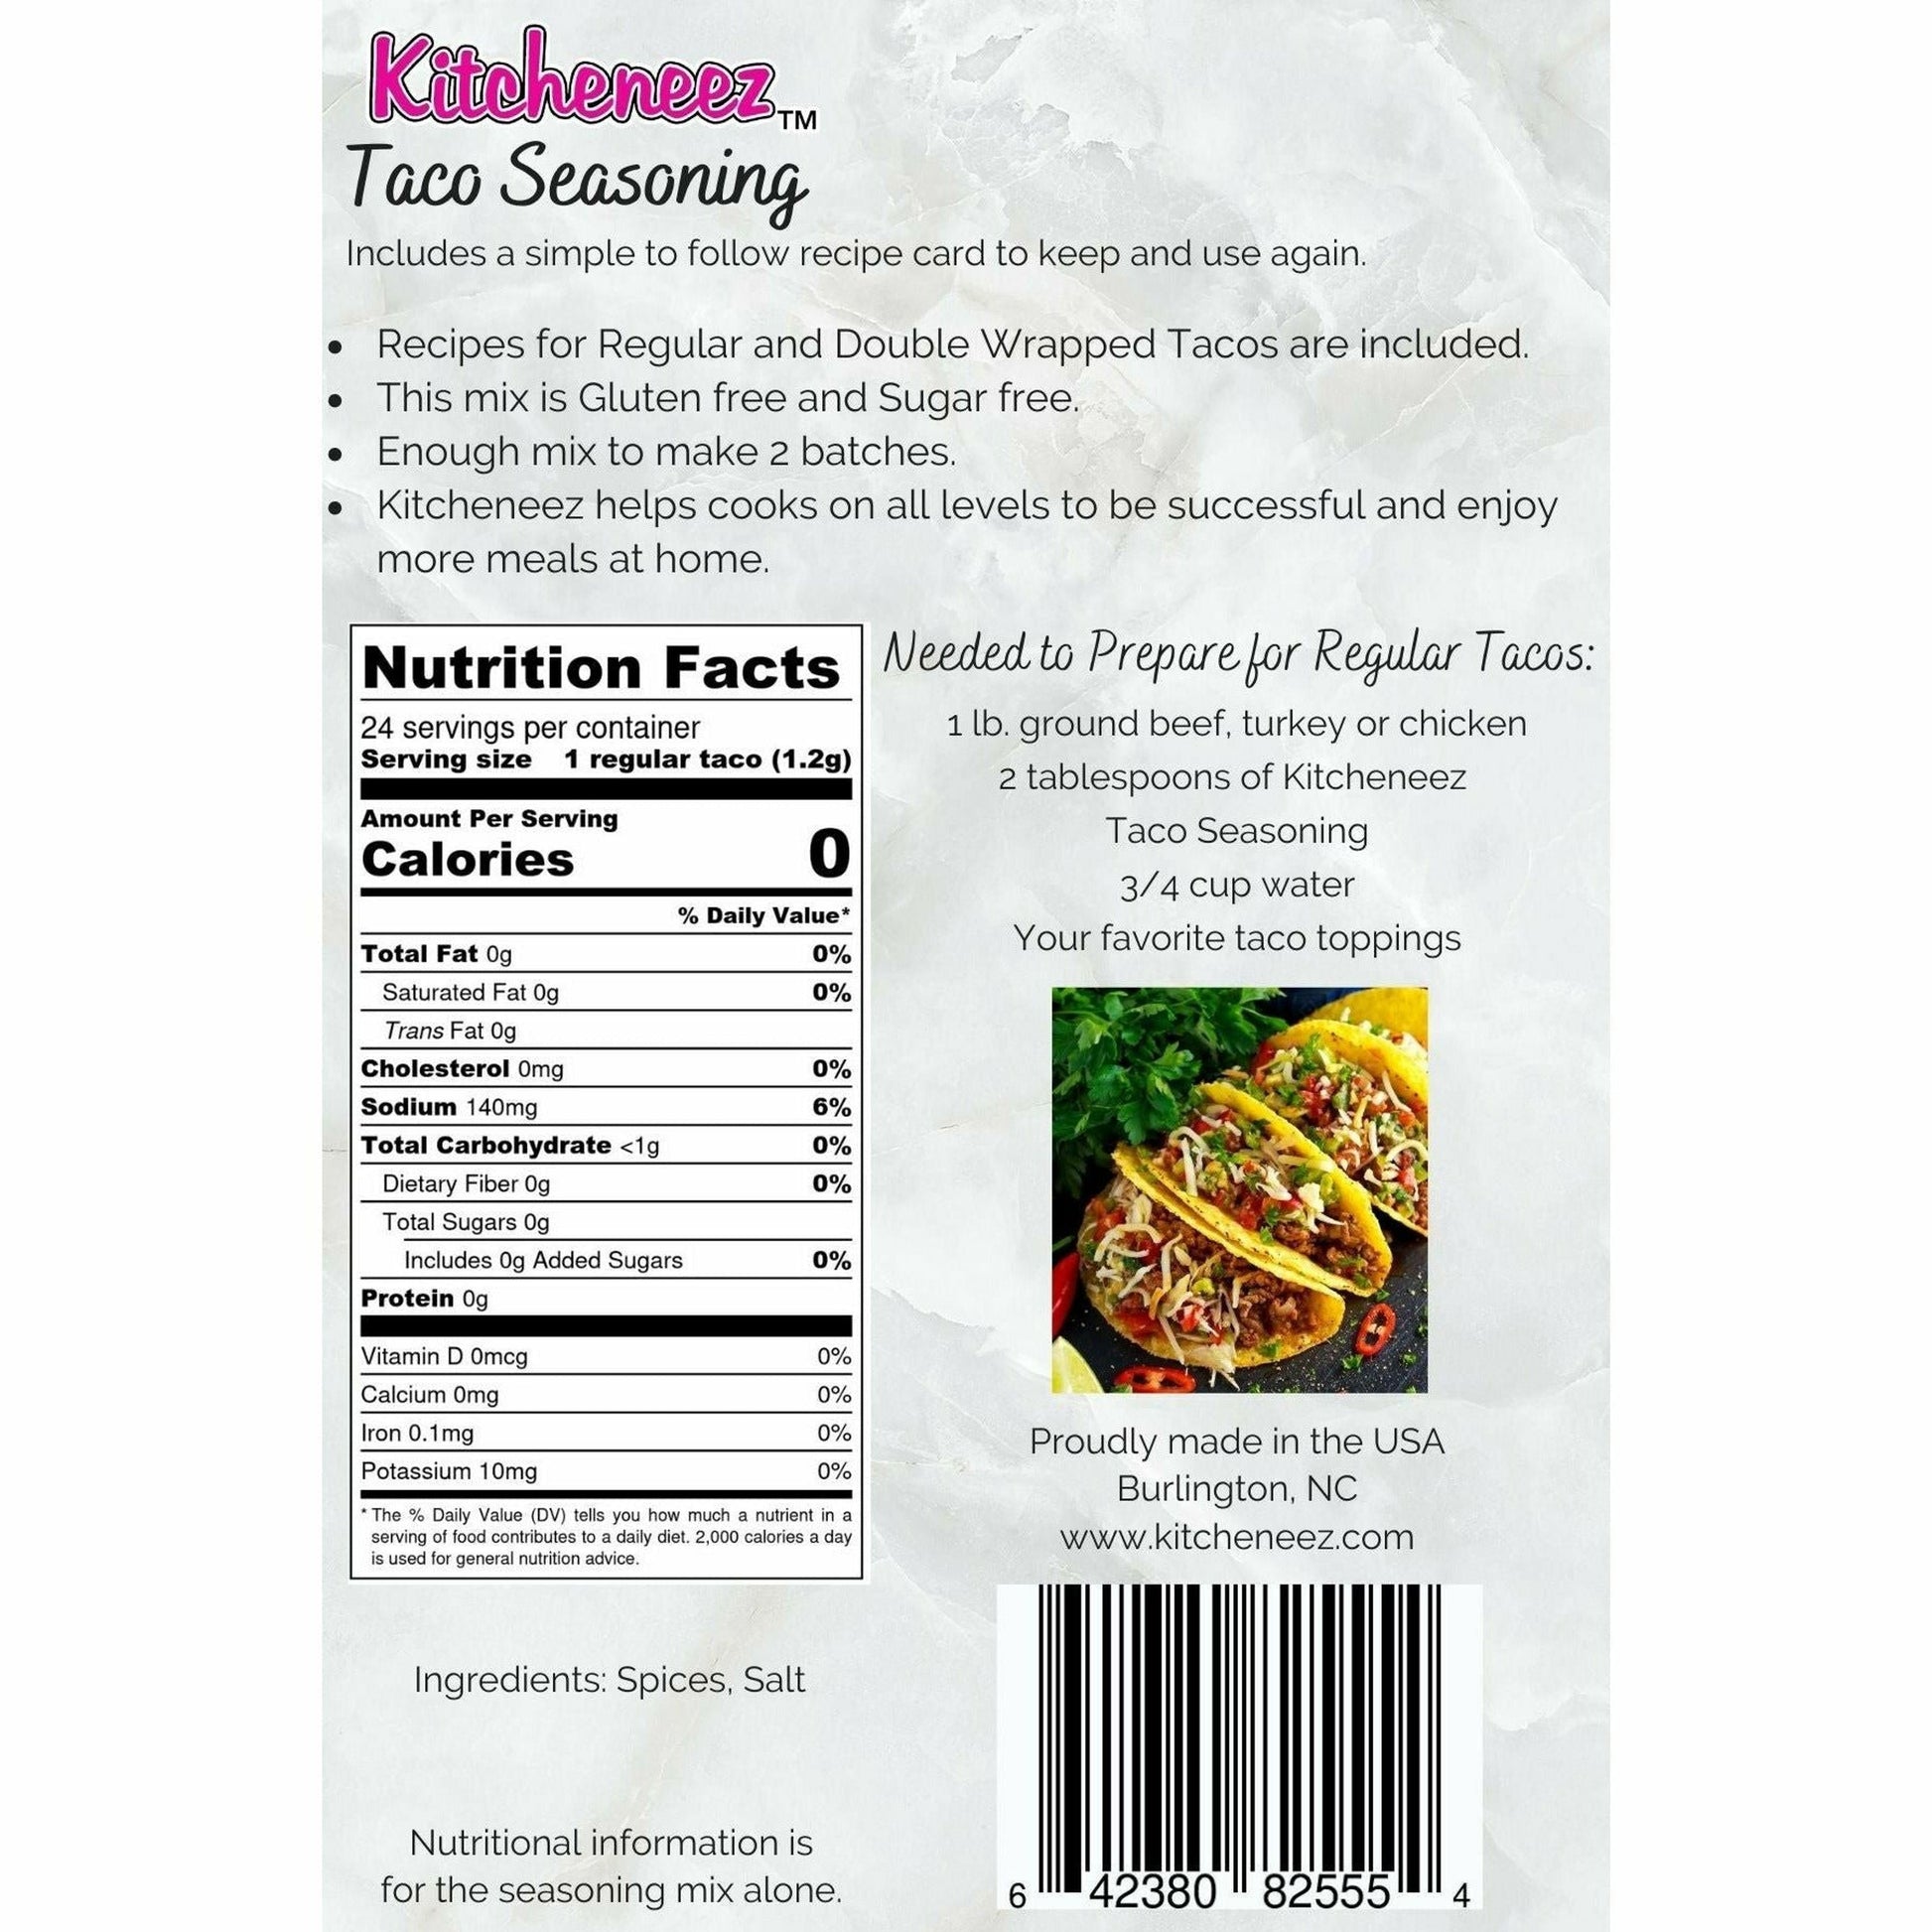 Taco Seasoning (comes with the recipe to make Double Wrapped Tacos) - Kitcheneez Mixes & More!